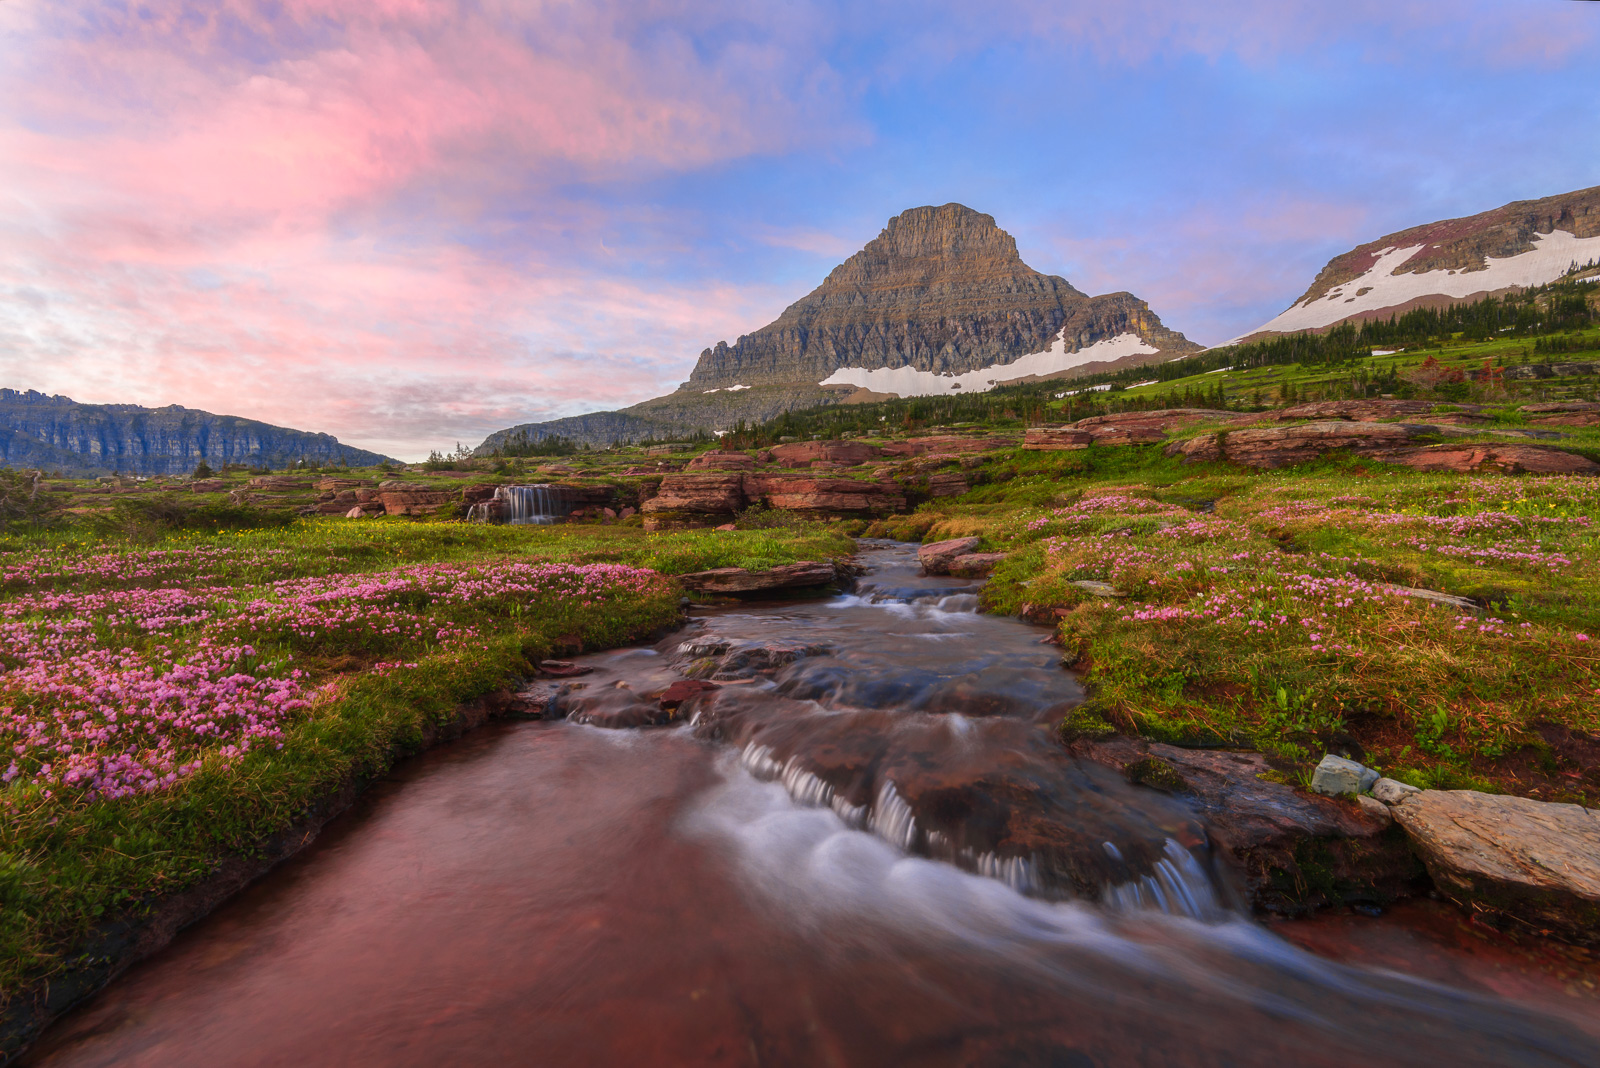 Summer sunrise over Reynolds Mountain with blooming alpine flowers from Logan Pass, Glacier National Park.